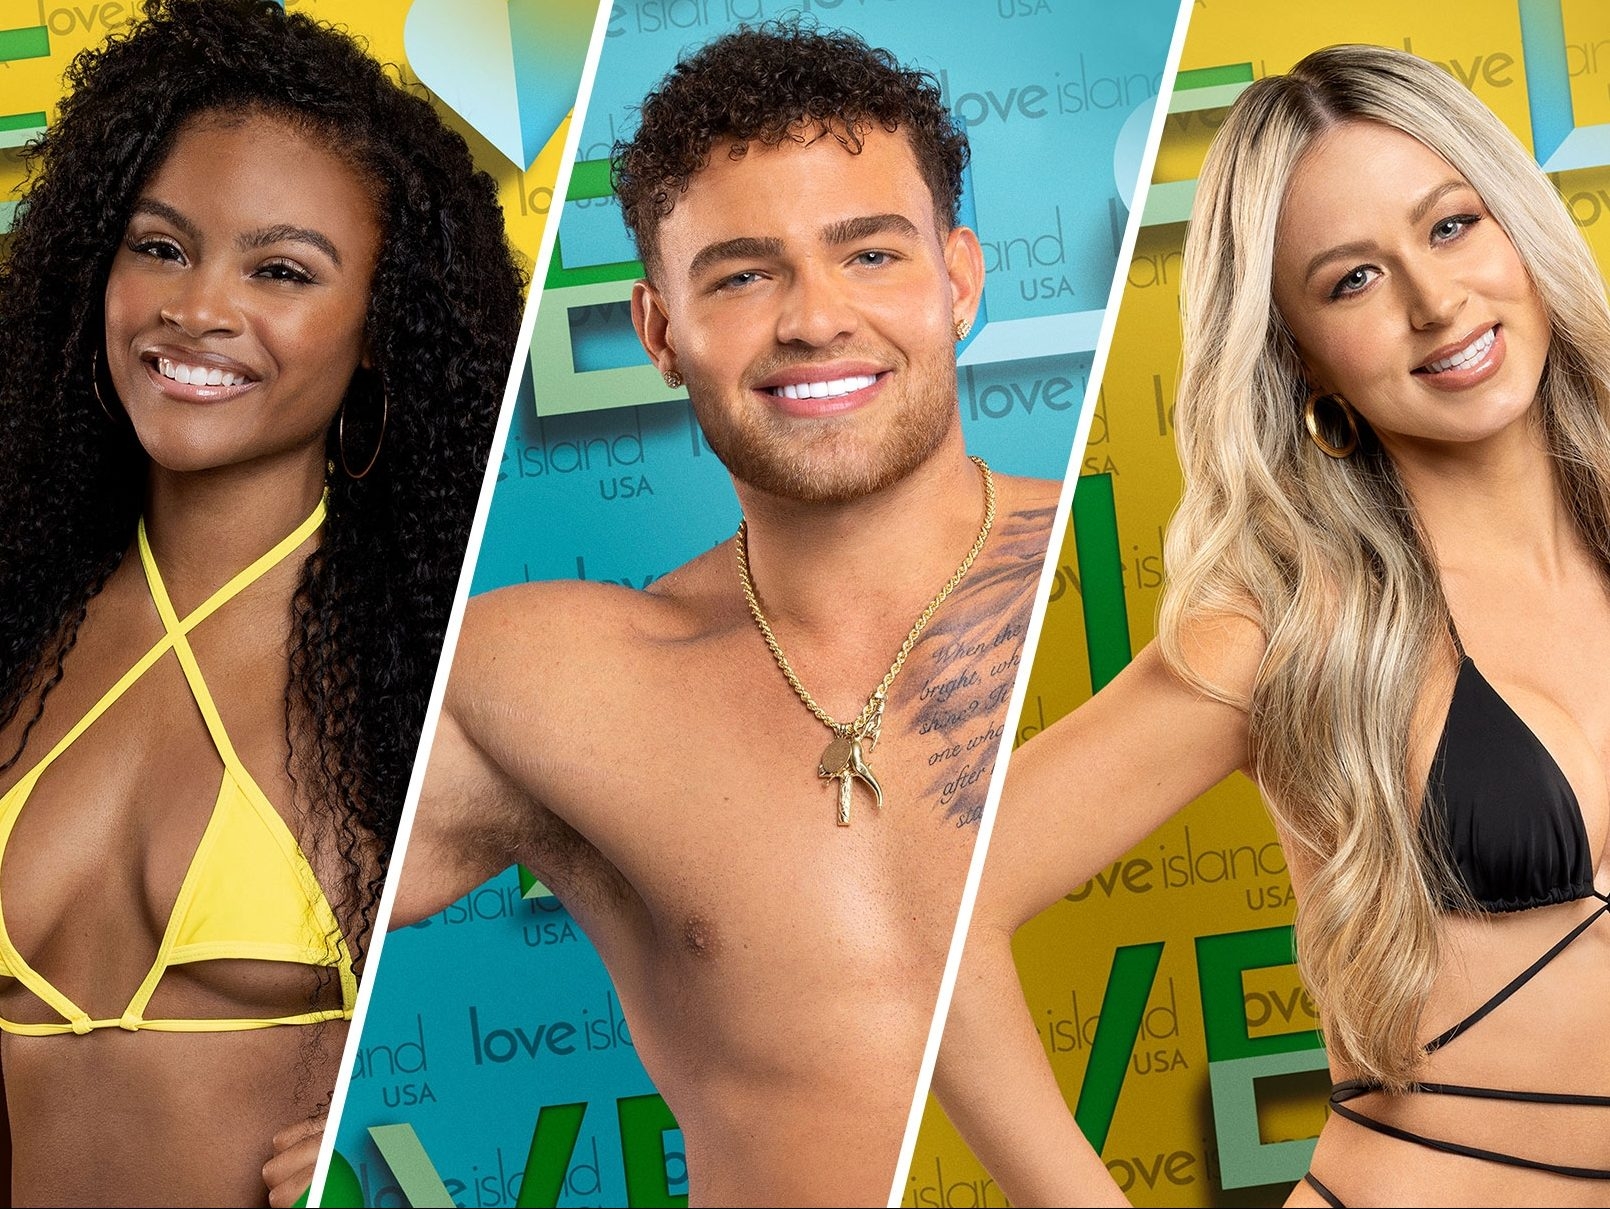 Love Island USA and Secrets of Playboy top this week's TV must